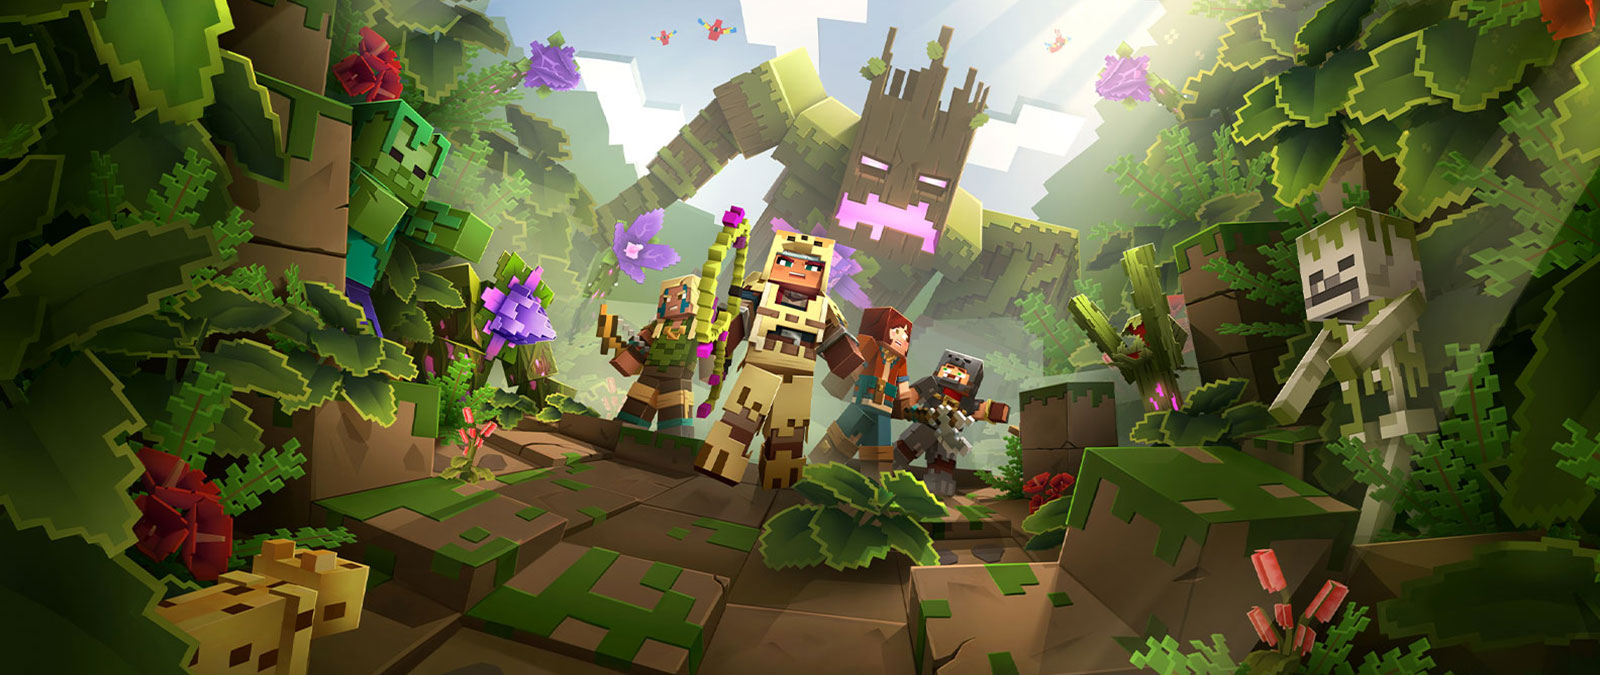 minecraft dungeons release date xbox one